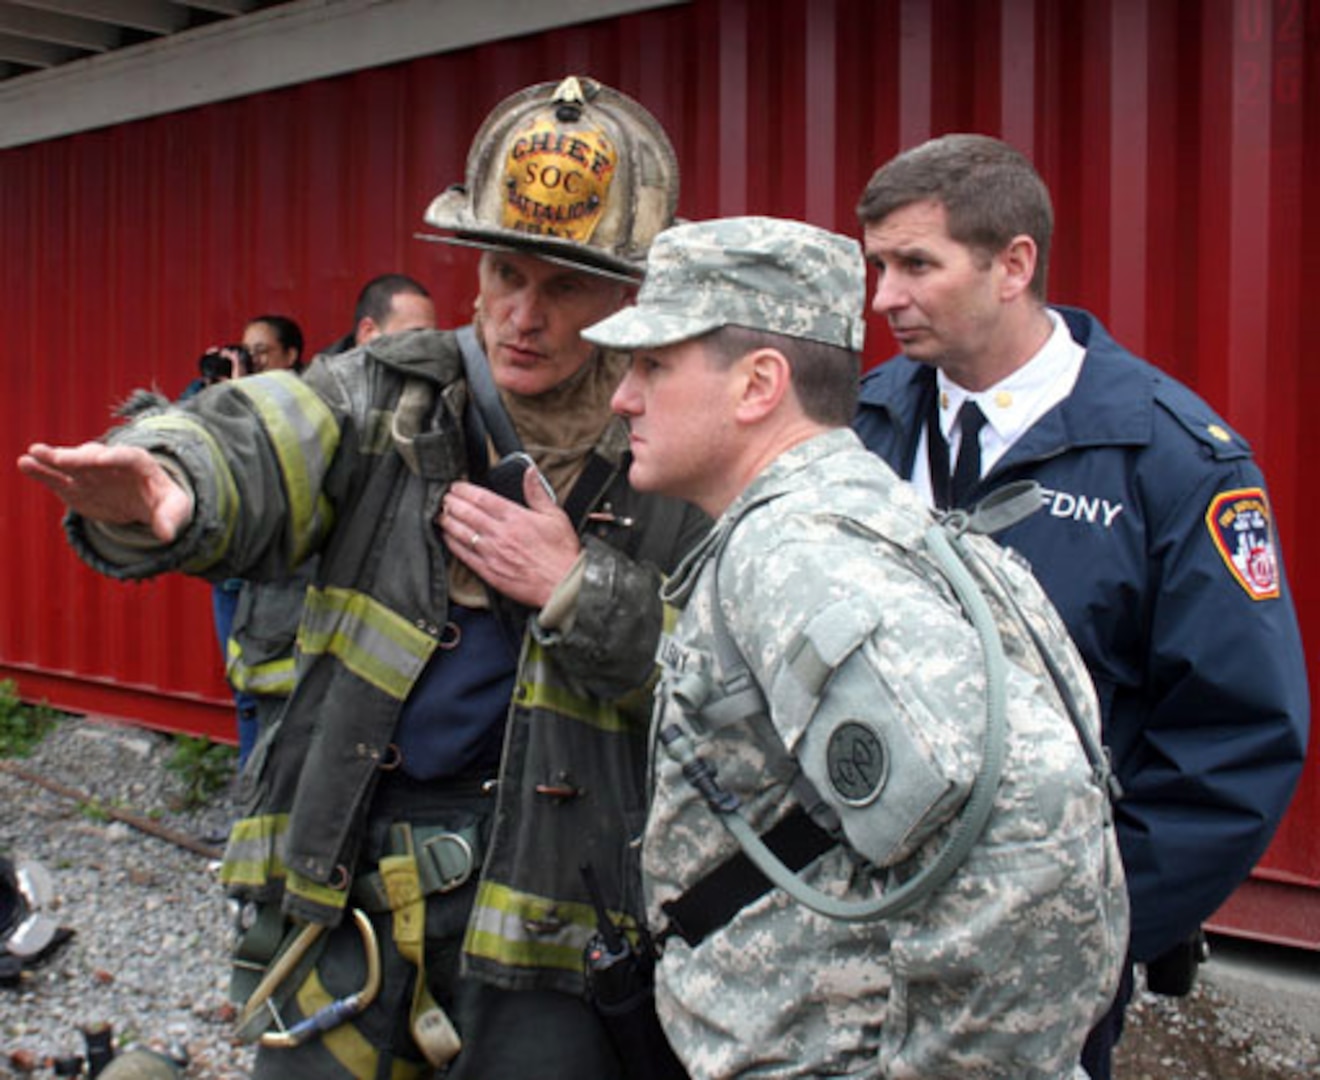 New York Army National Guard Lt. Col. Dennis Deeley coordinates the confined
space extraction of casualties with incident commander Chief Don Hayde from
the New York City Fire Department's Special Operations Command during a joint
interagency training event, May 3, 2008, between the FDNY and the New York
National Guard at the FDNY's fire training academy on Randall's Island, N.Y.